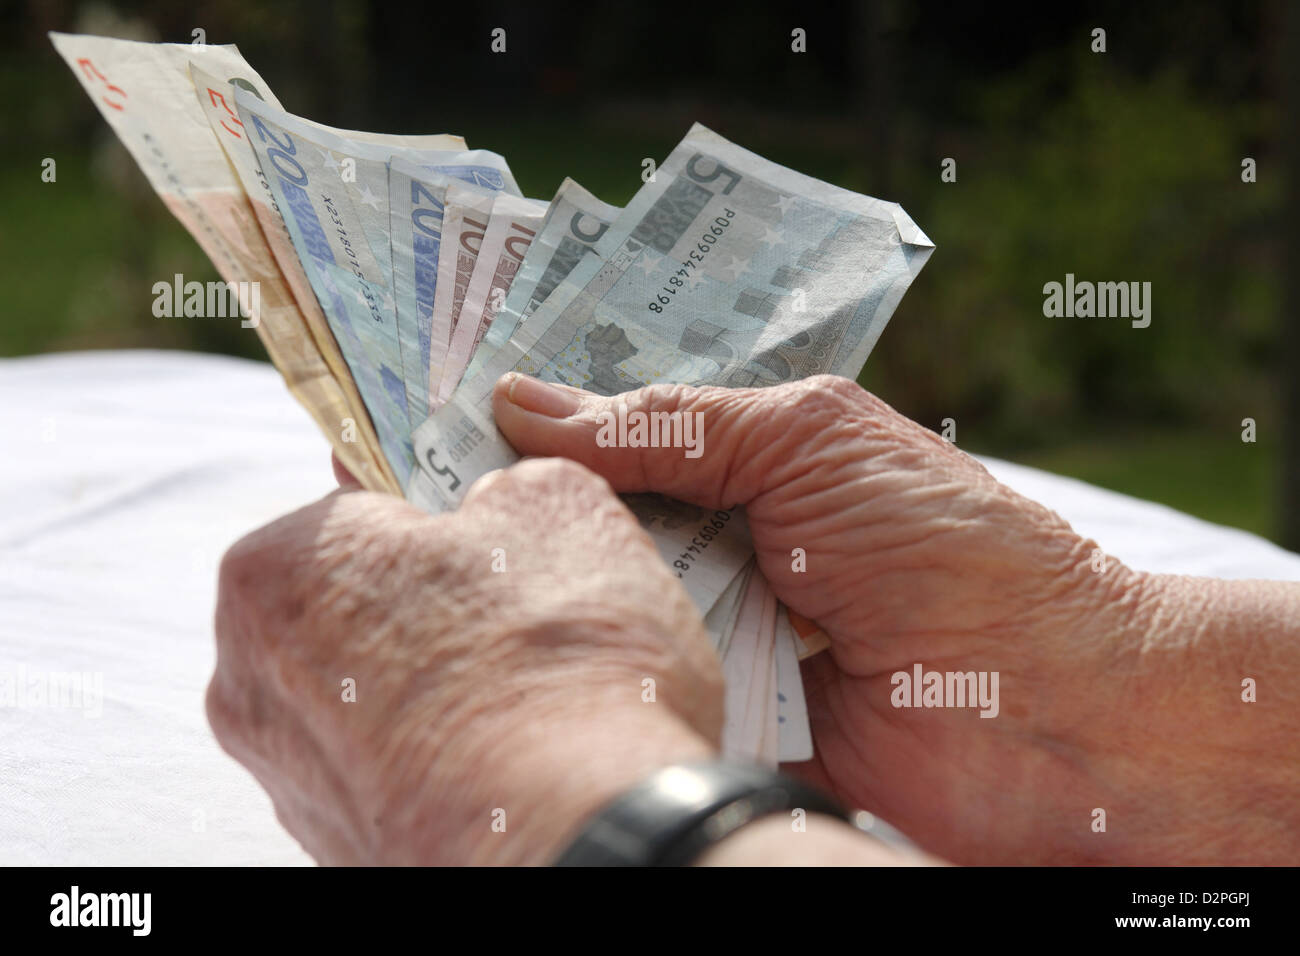 Berlin, Germany, a pensioner holds banknotes in his hand Stock Photo